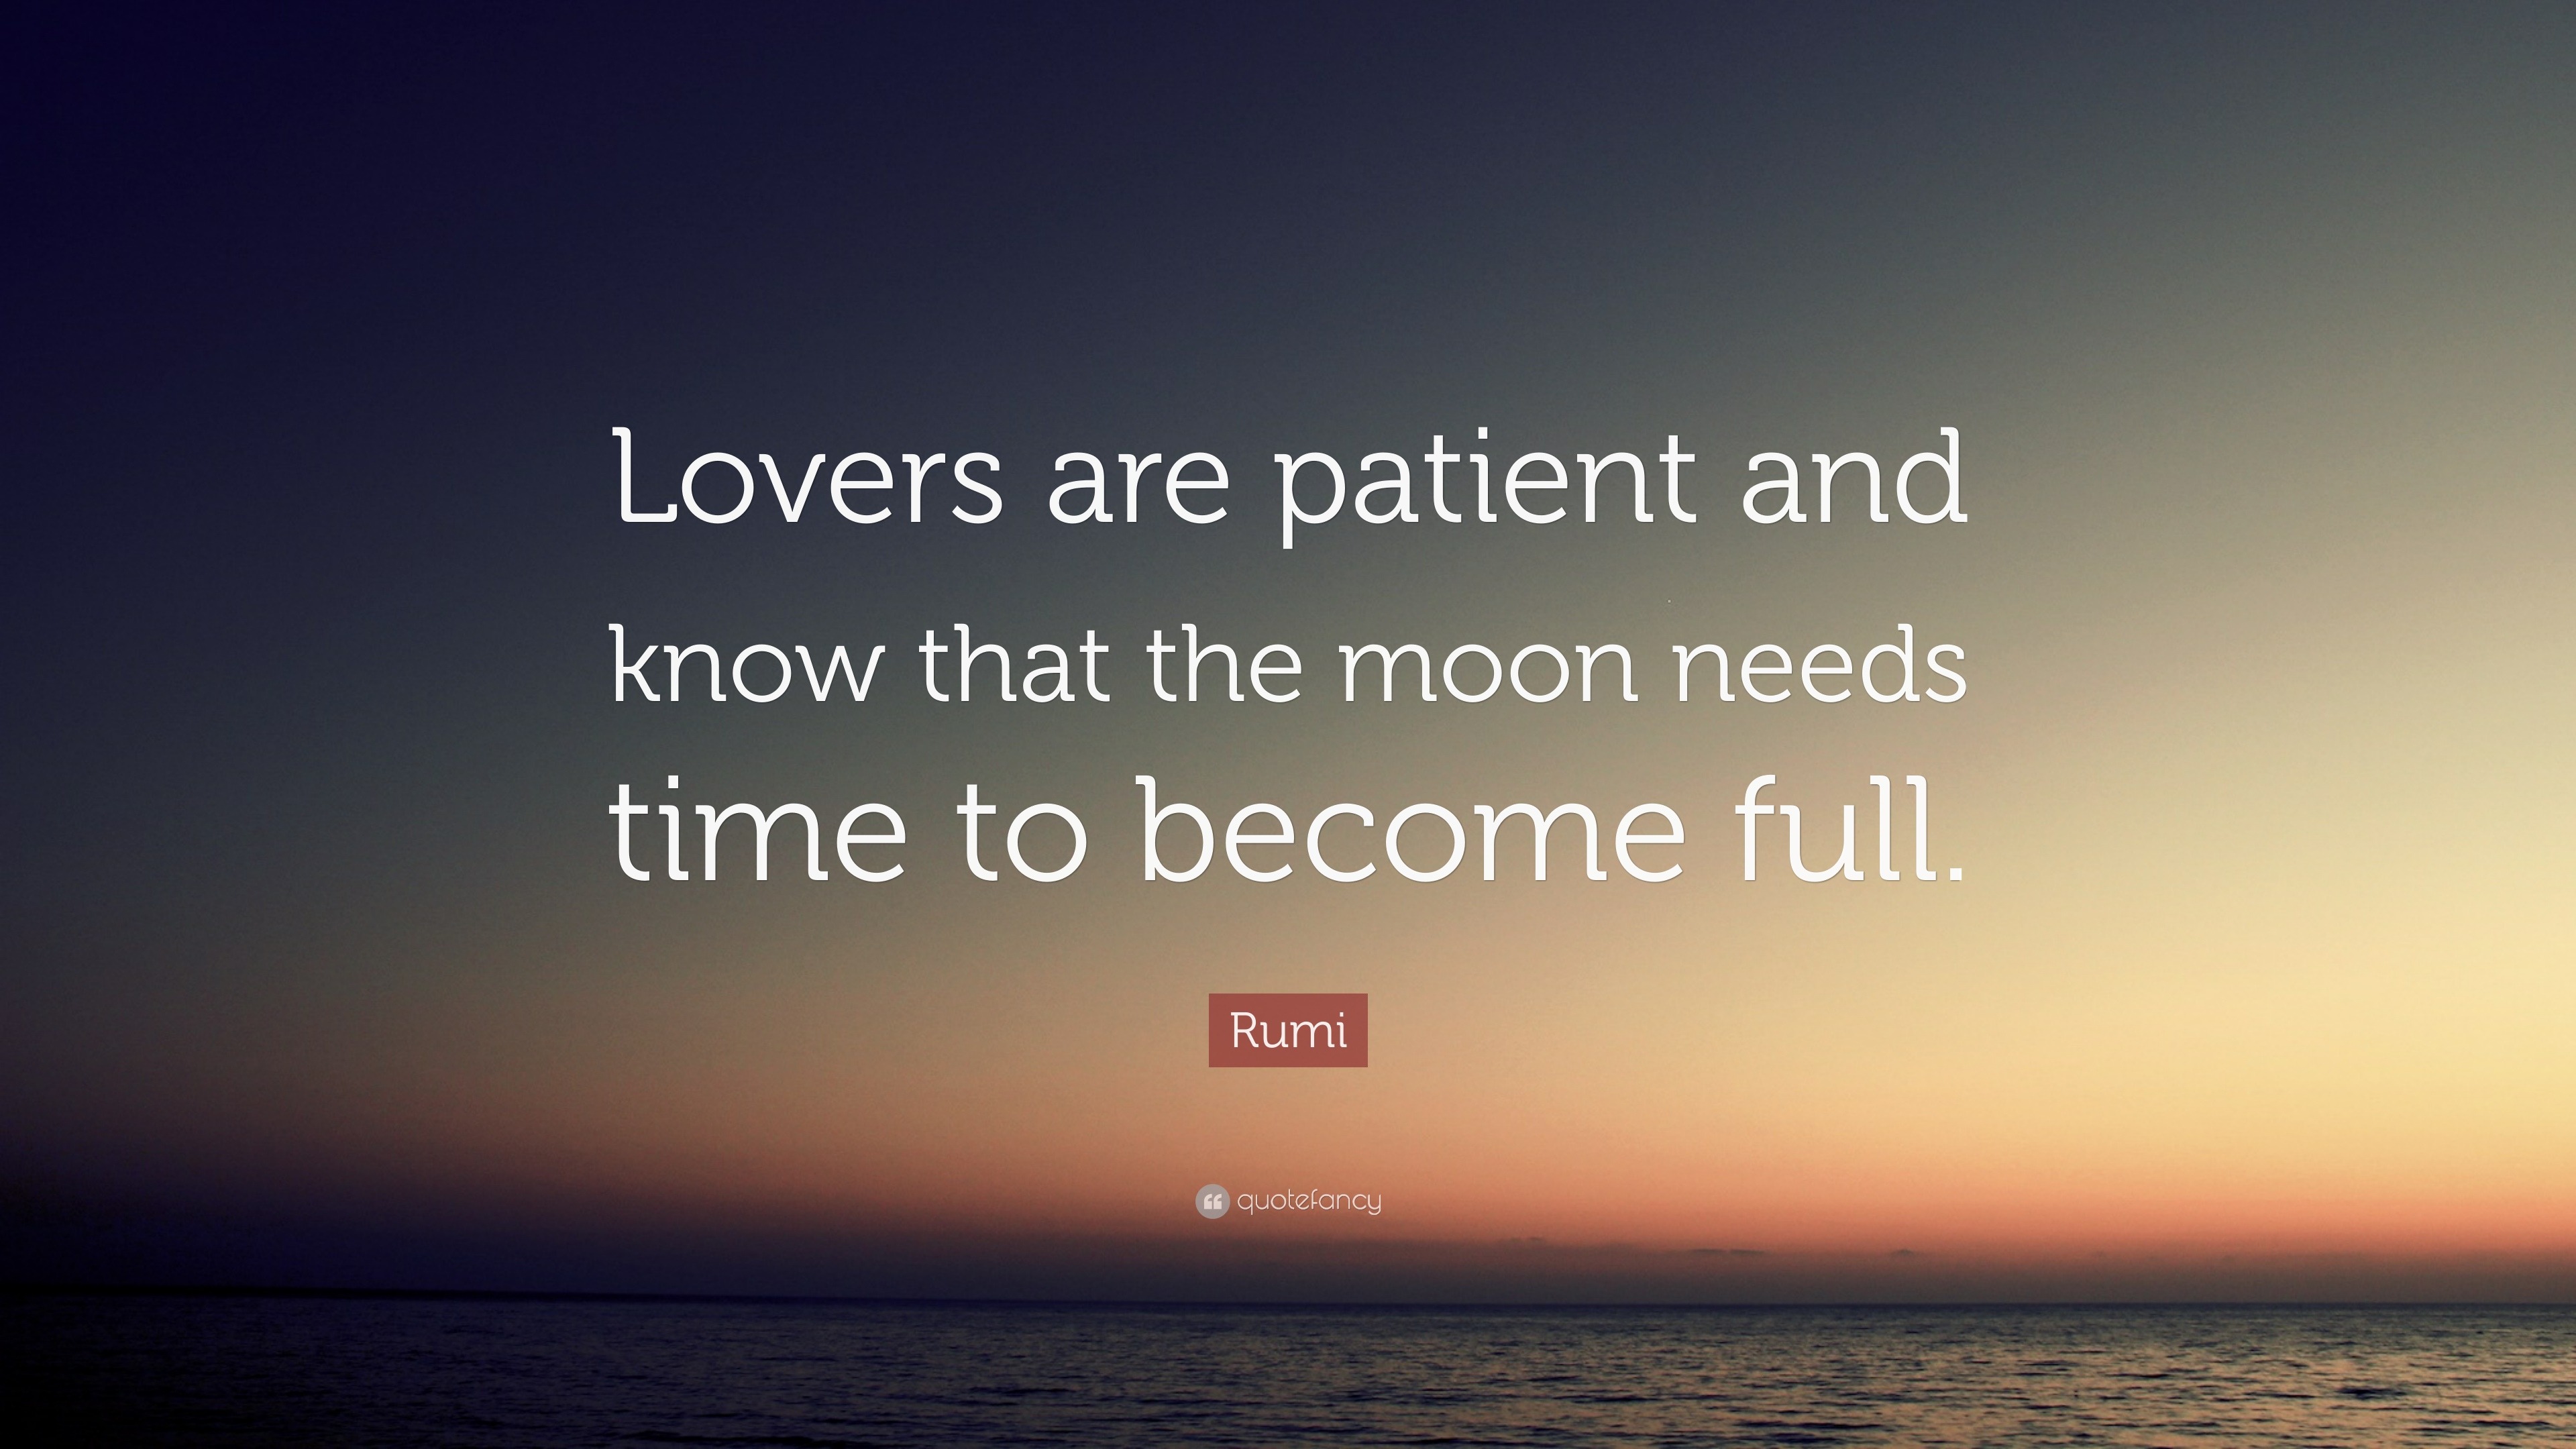 Rumi Quote “Lovers are patient and know that the moon